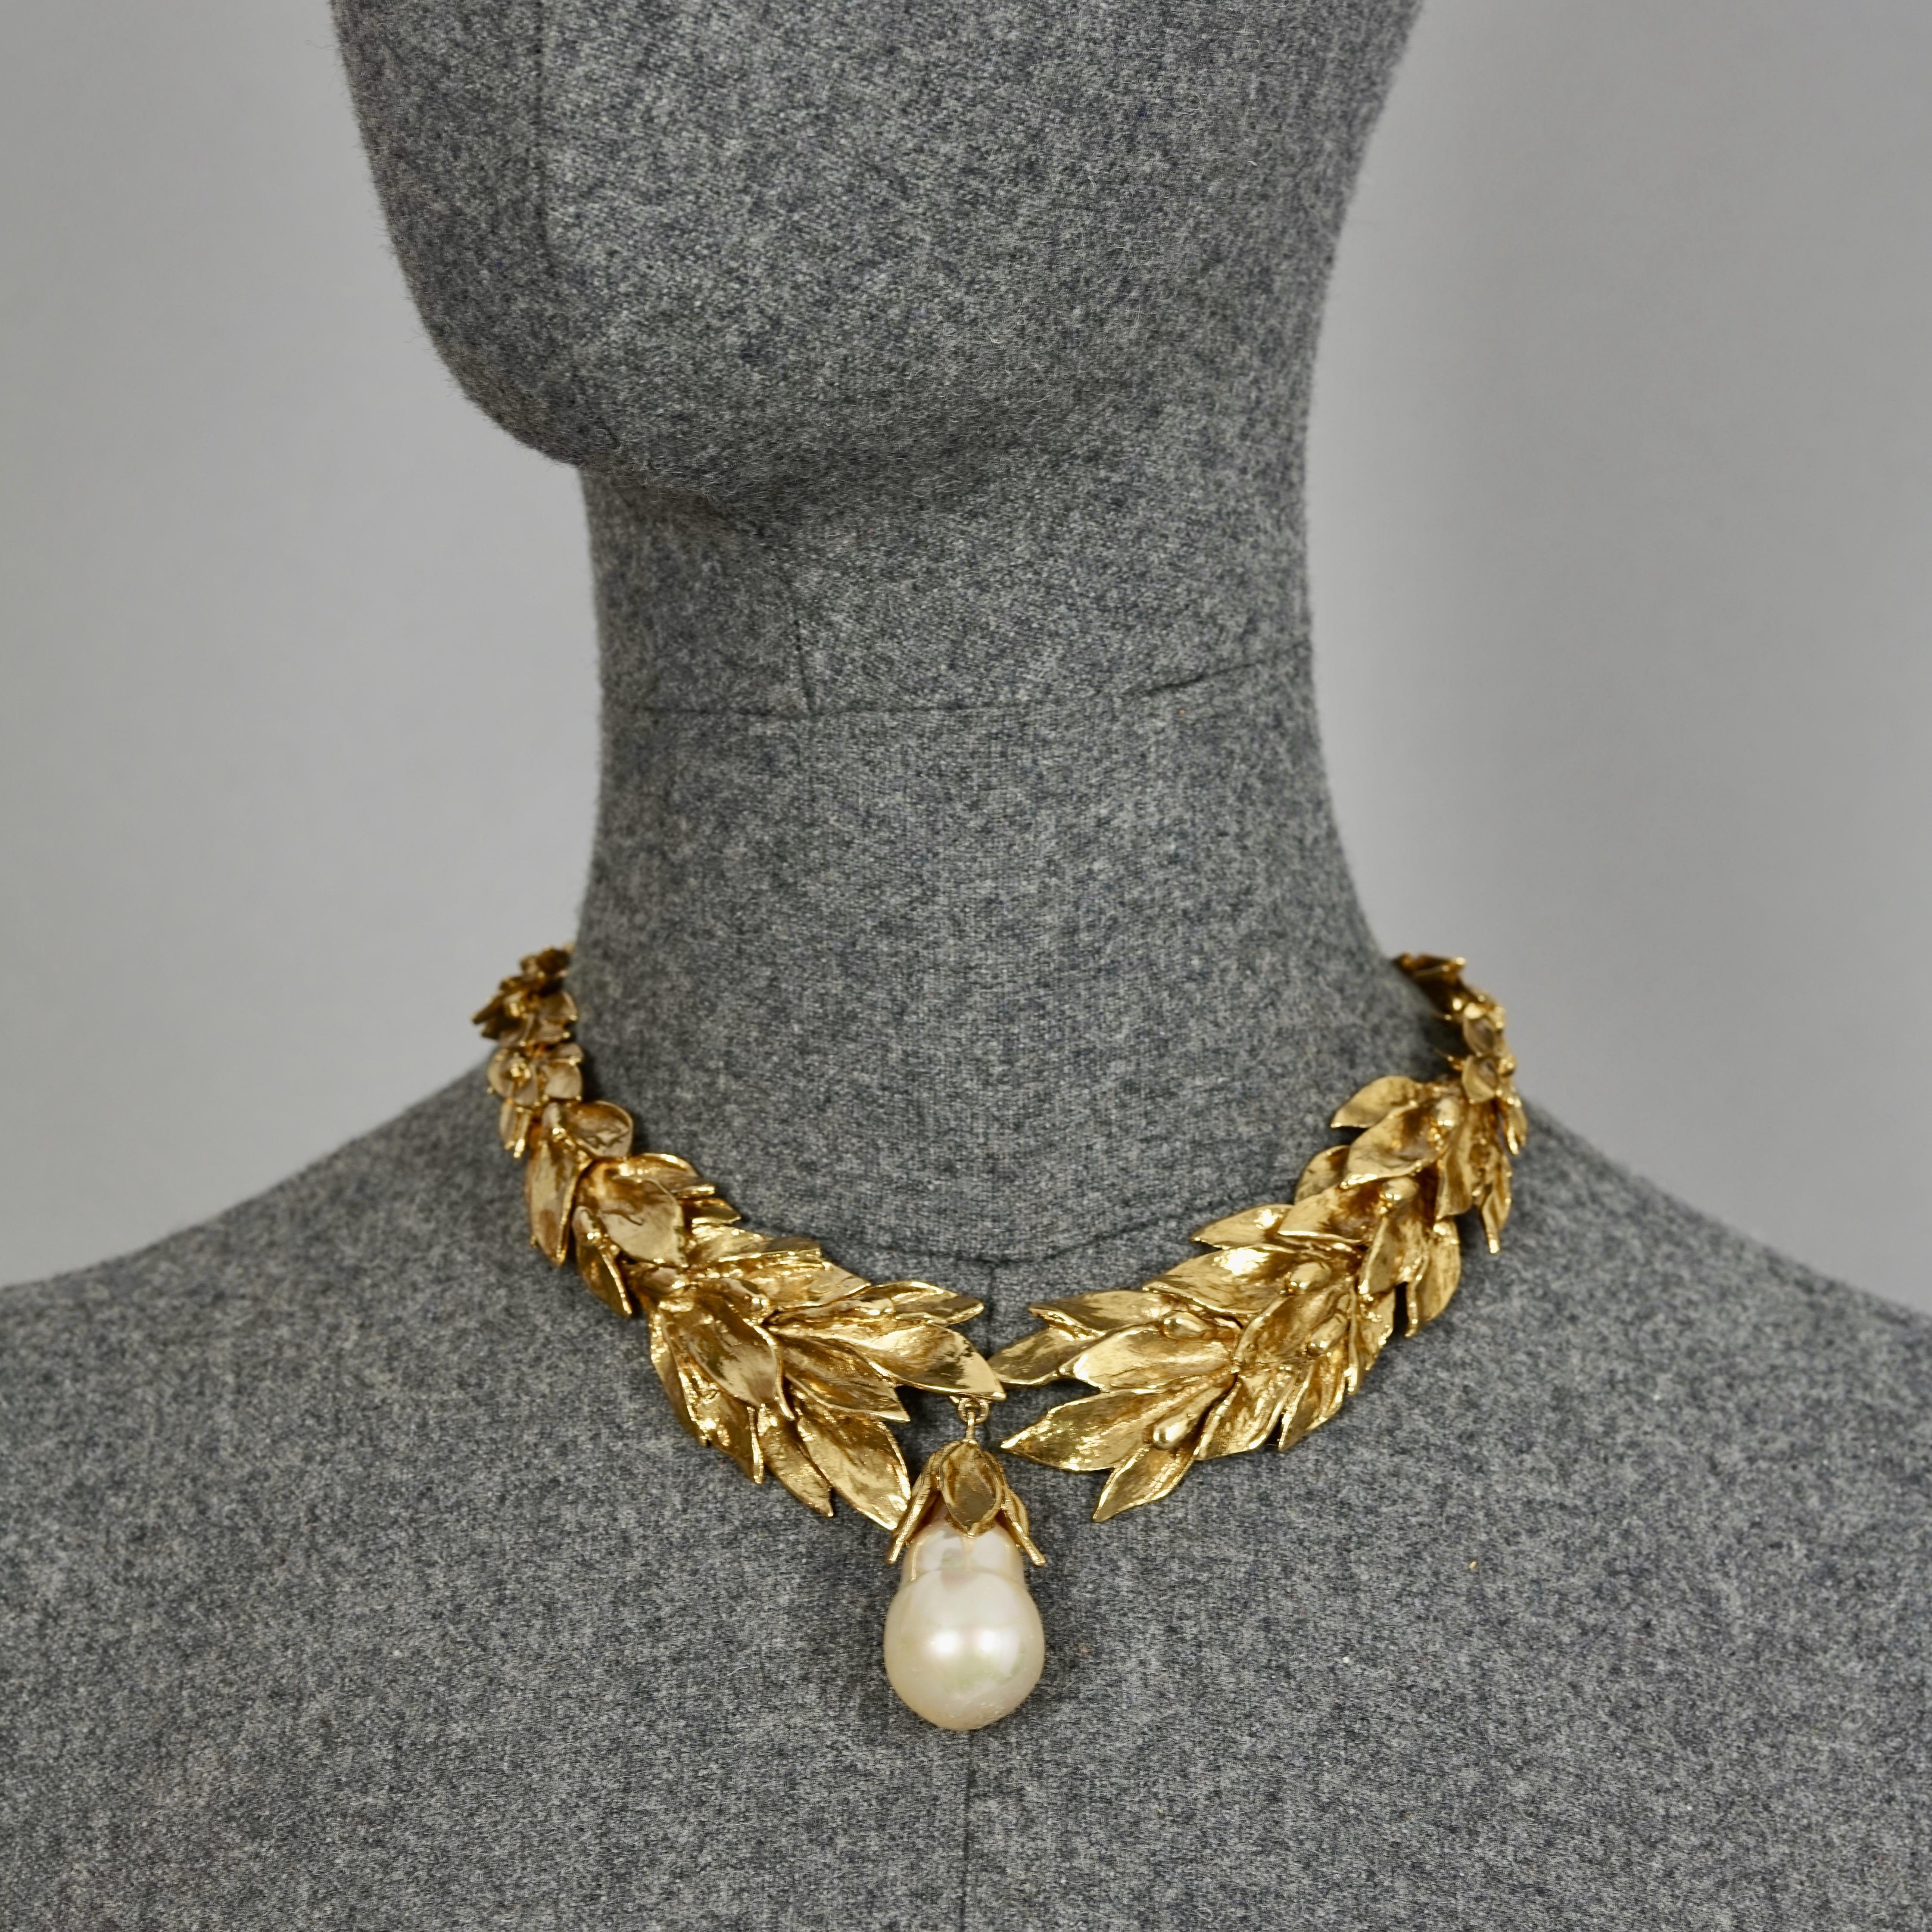 Vintage YVES SAINT LAURENT Ysl by Robert Goossens Wheat Pearl Drop Necklace

Measurements:
Center Height: 2.56 inches (6.5 cm)
Wearable Length: 14.37 inches (36.5 cm) to 16.73 inches (42.5 cm)

Features:
- 100% Authentic YVES SAINT LAURENT.
- Wheat